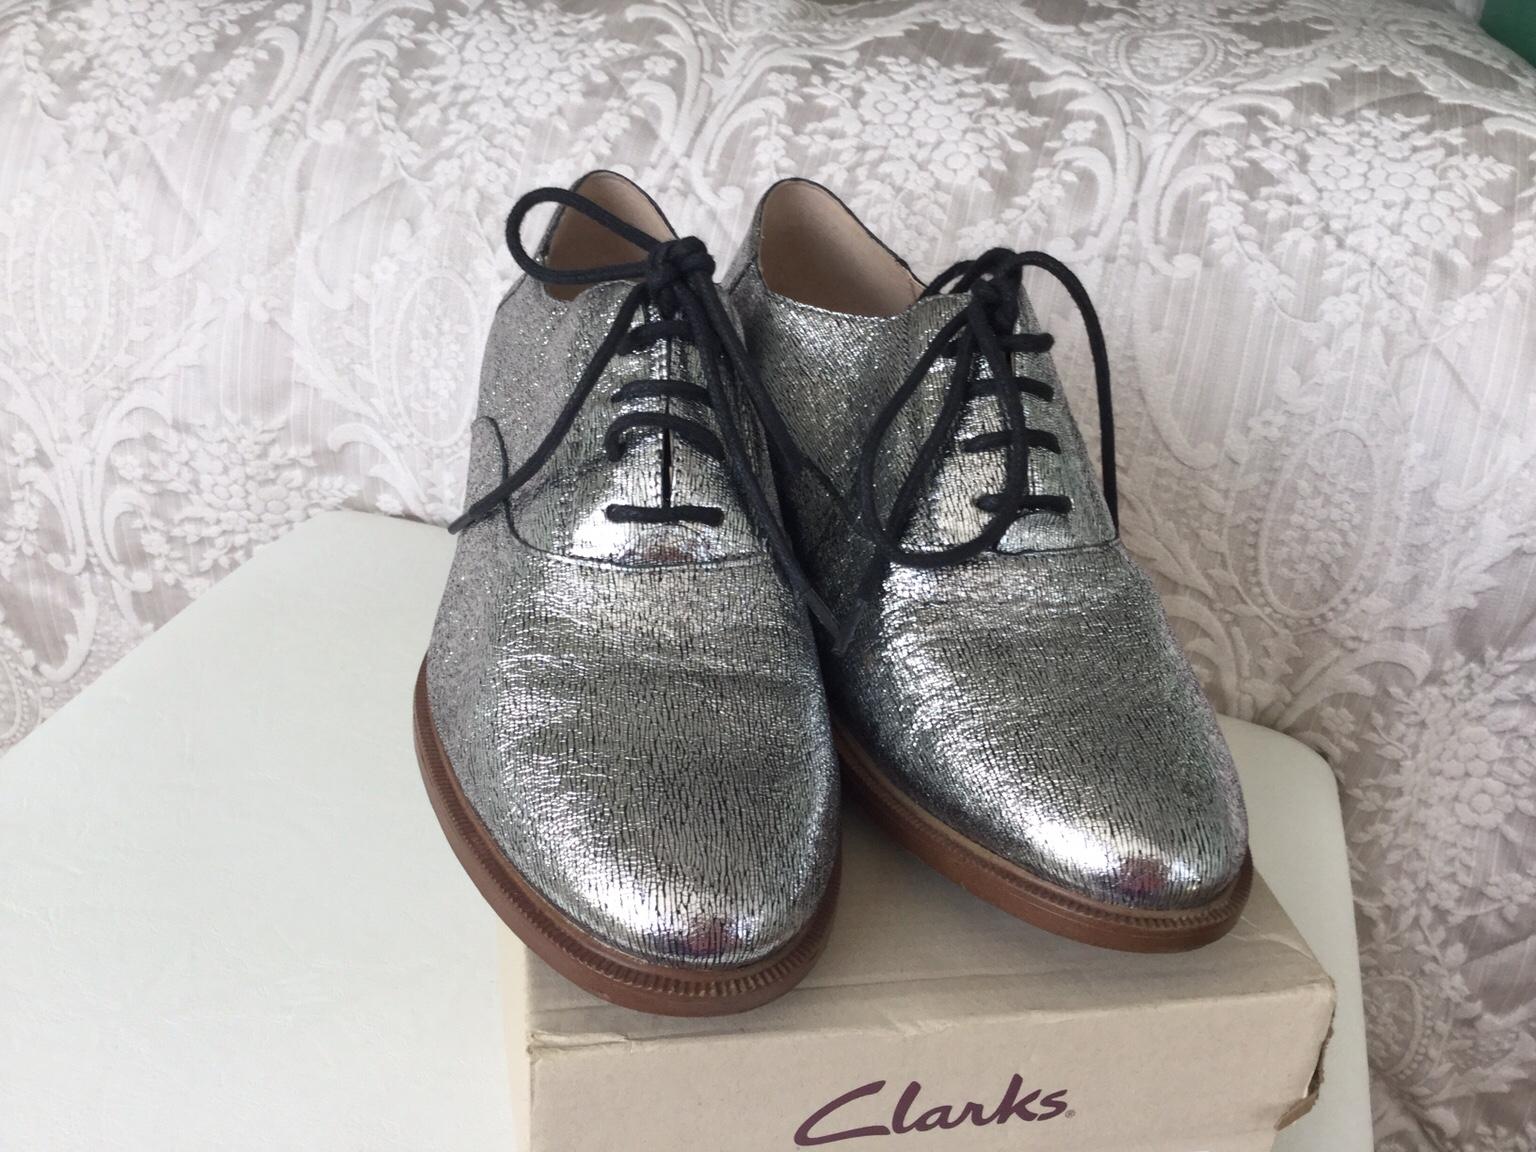 silver brogues clarks